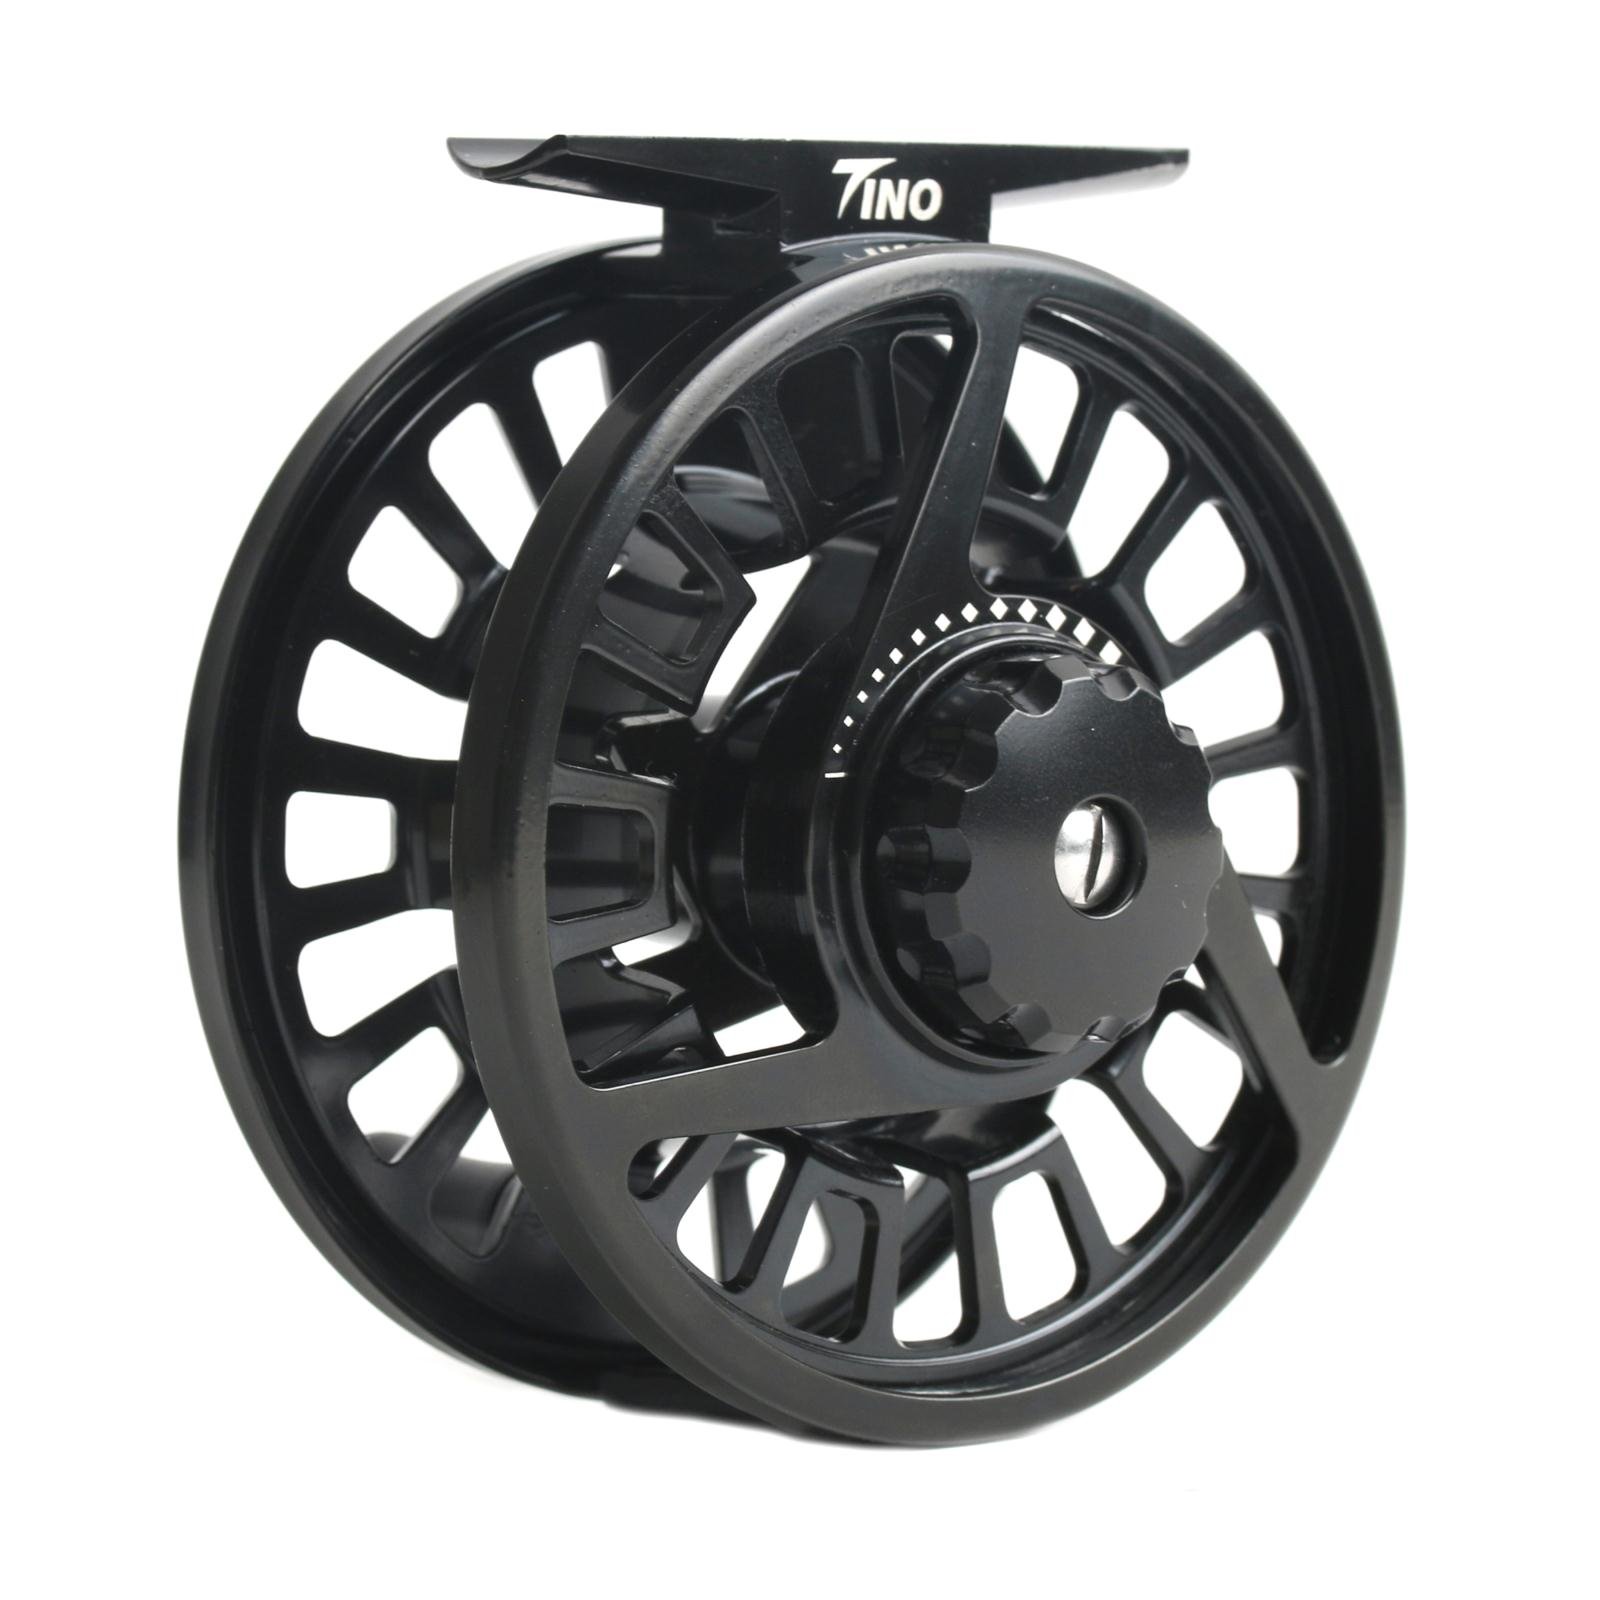 Maxcatch Tino Fly Fishing Reel (3/4wt 5/6wt 7/8wt) and Pre-Loaded Fly Reel